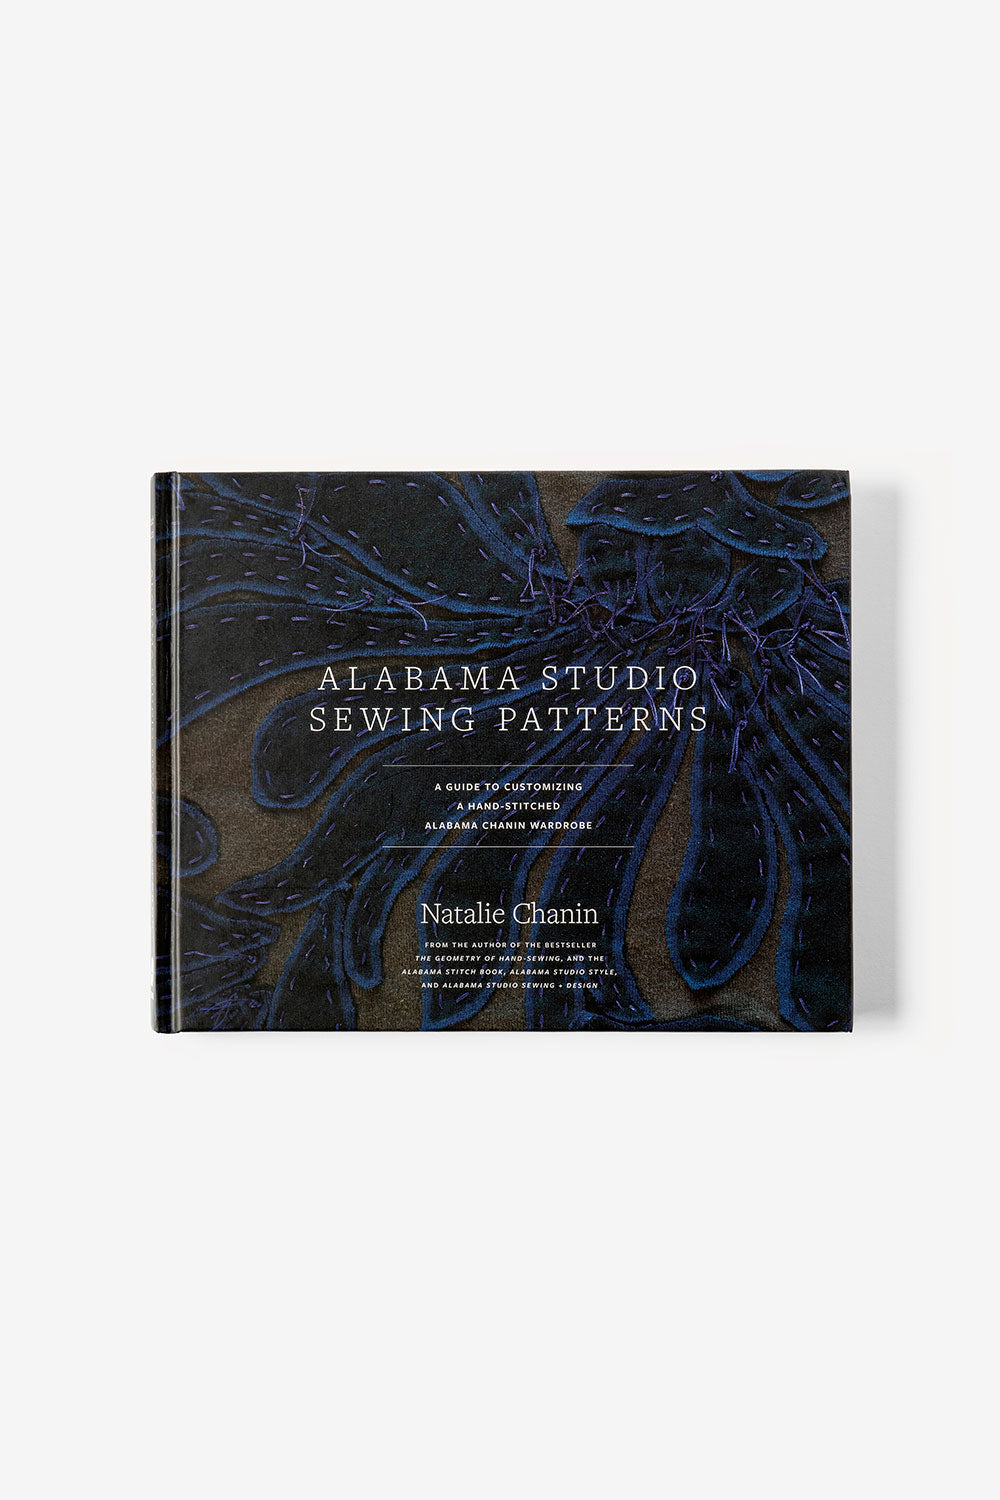 The School of Making Alabama Studio Sewing Patterns by Natalie Chanin Book Cover